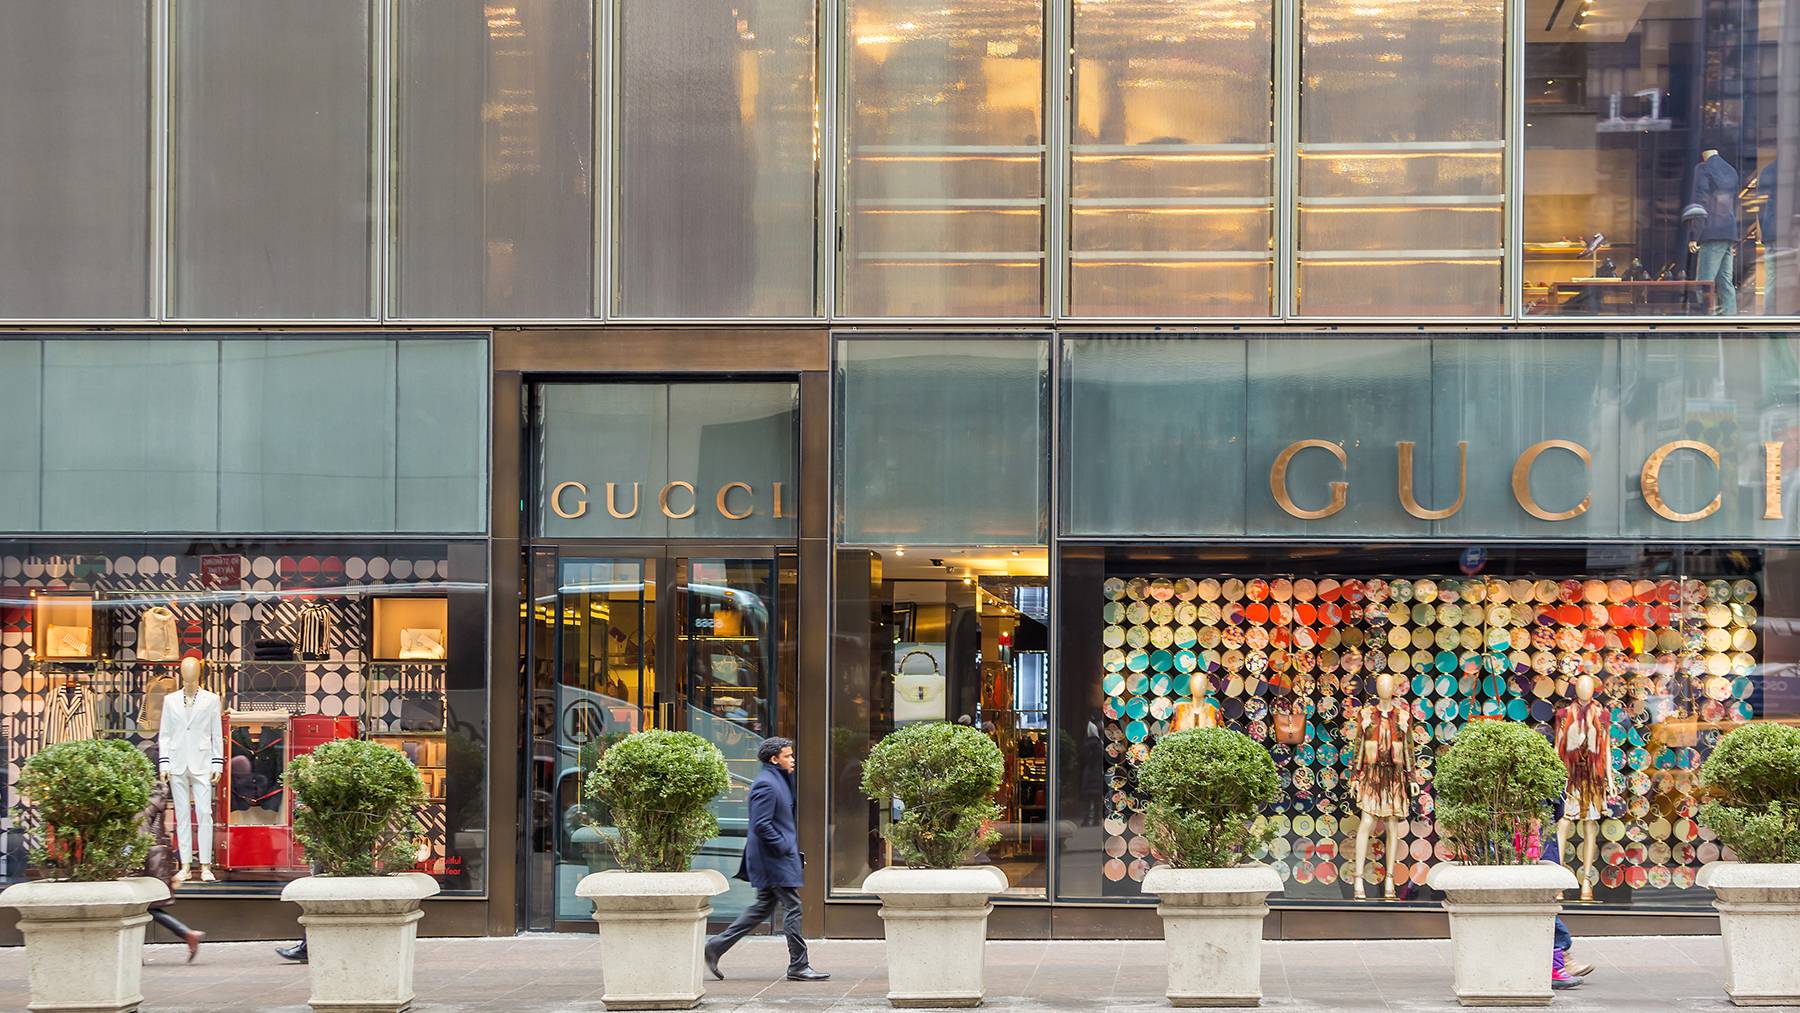 Gucci and other Kering brands are opening more US stores as sales in the country boom.